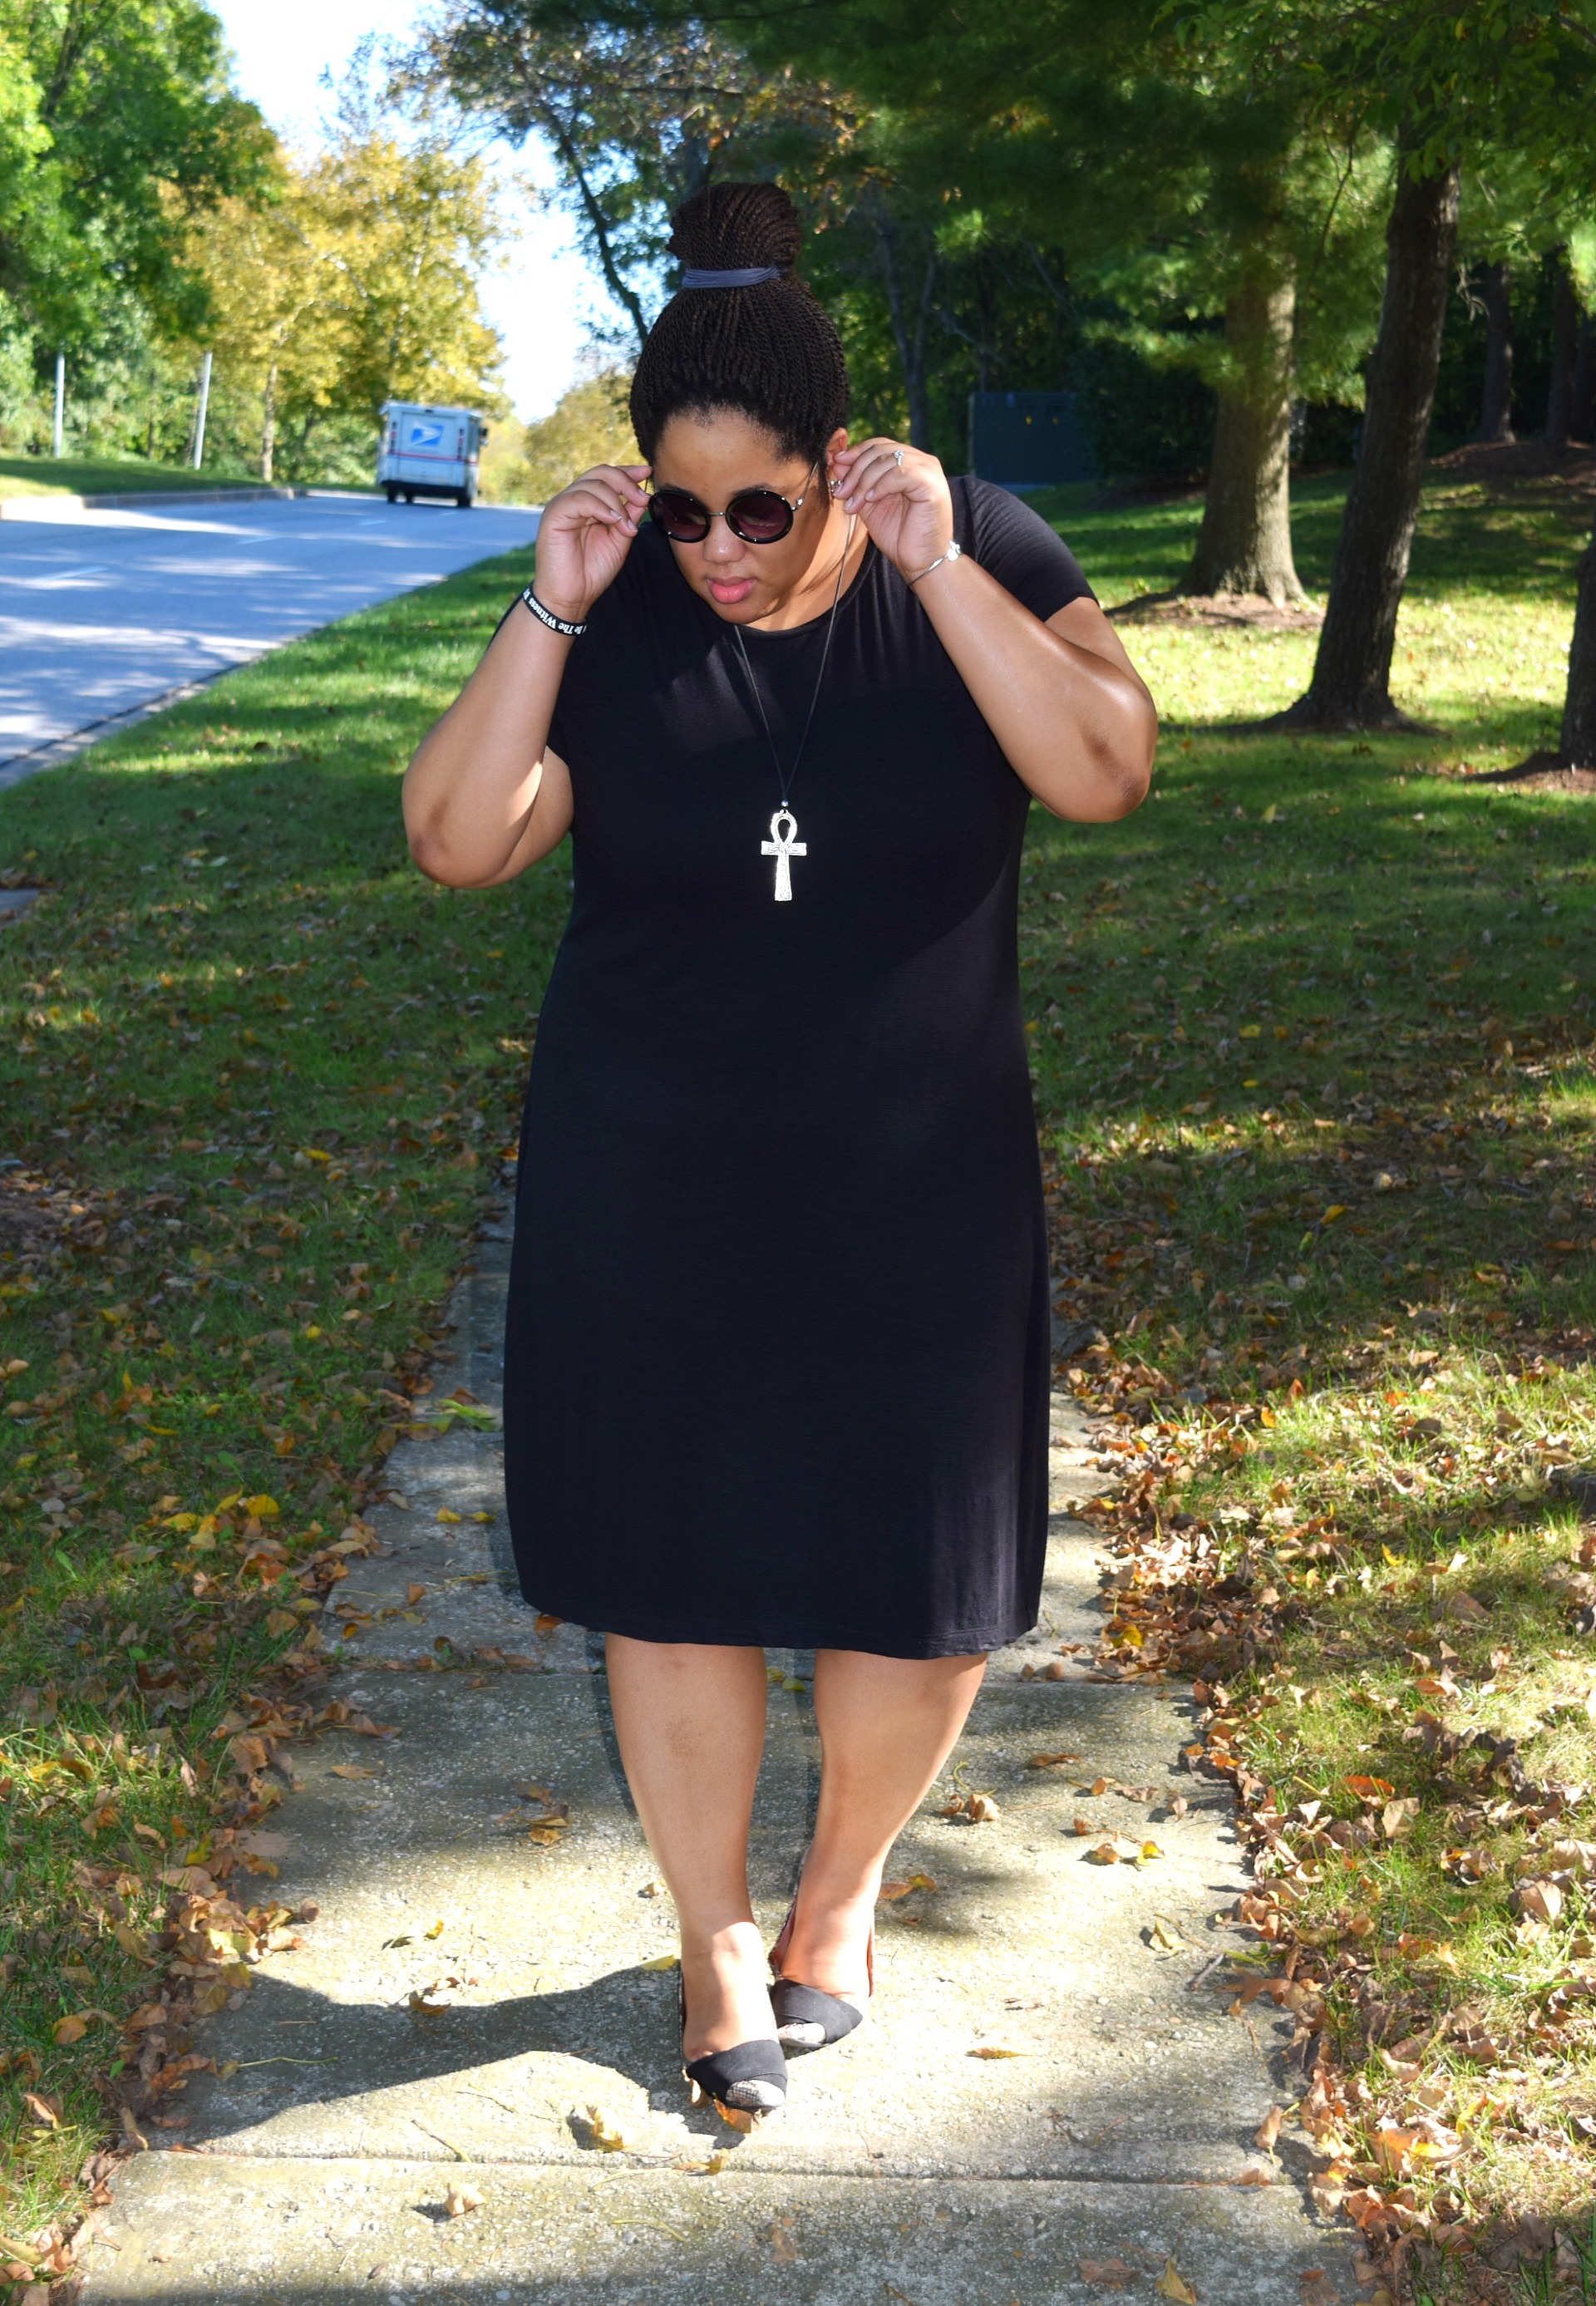 Ways to Simplify Your Wardrobe - All Black Outfit 